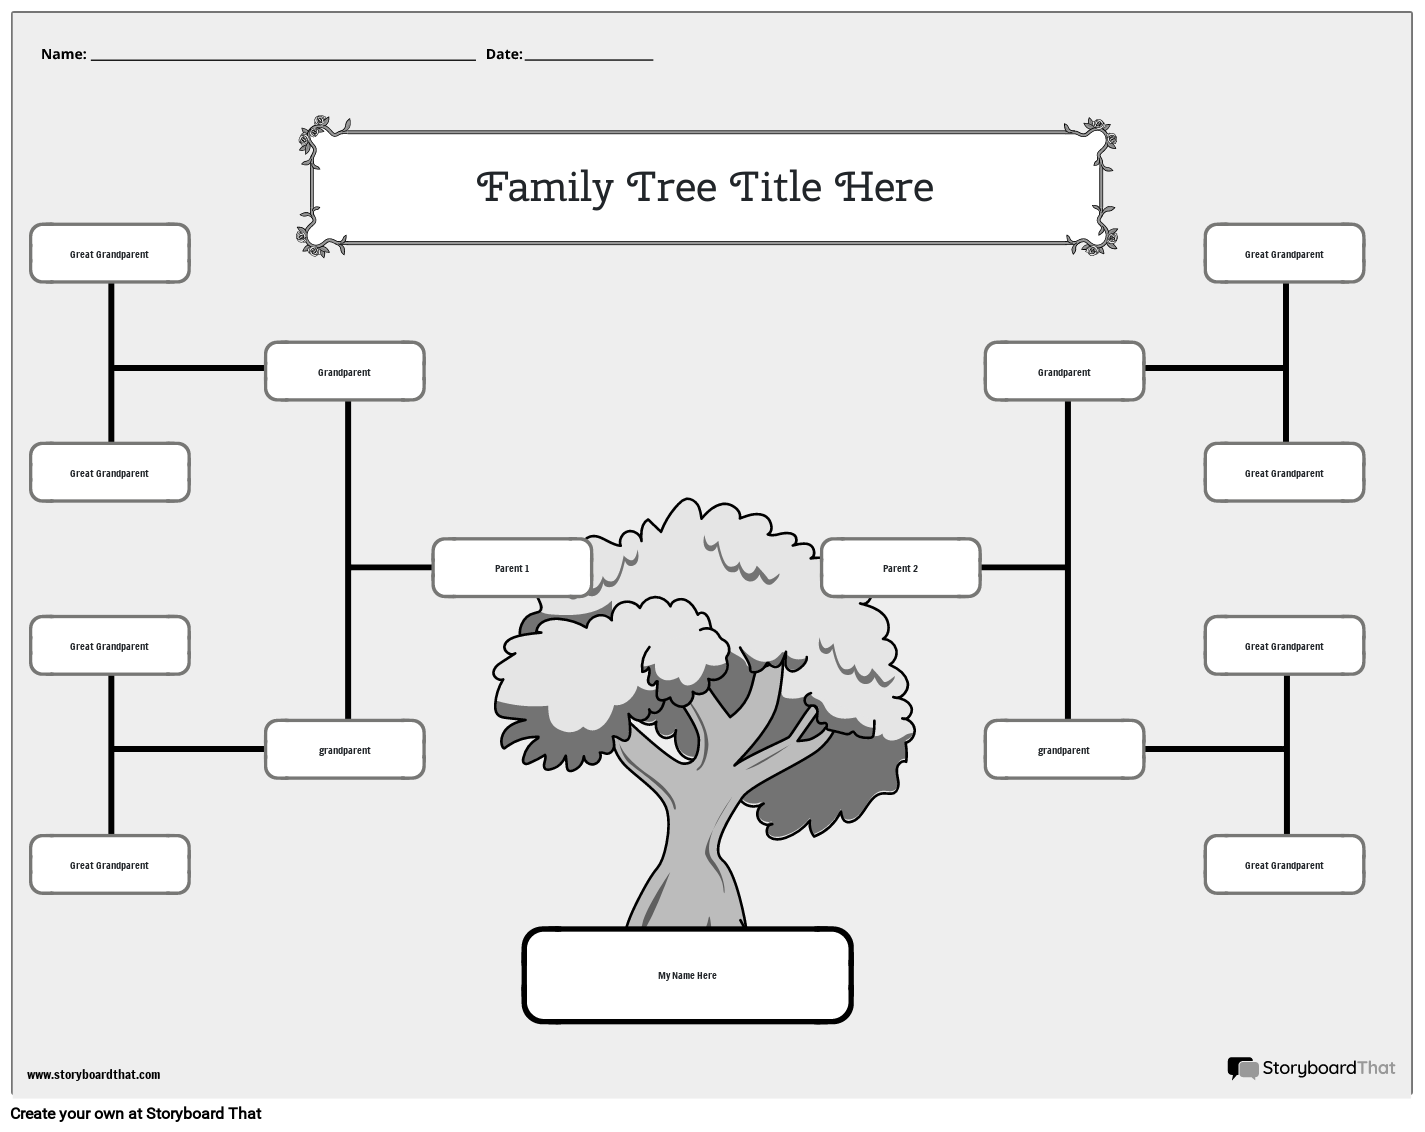 Family tree sketch hearts collection design Vectors graphic art designs in  editable .ai .eps .svg .cdr format free and easy download unlimit id:6826517